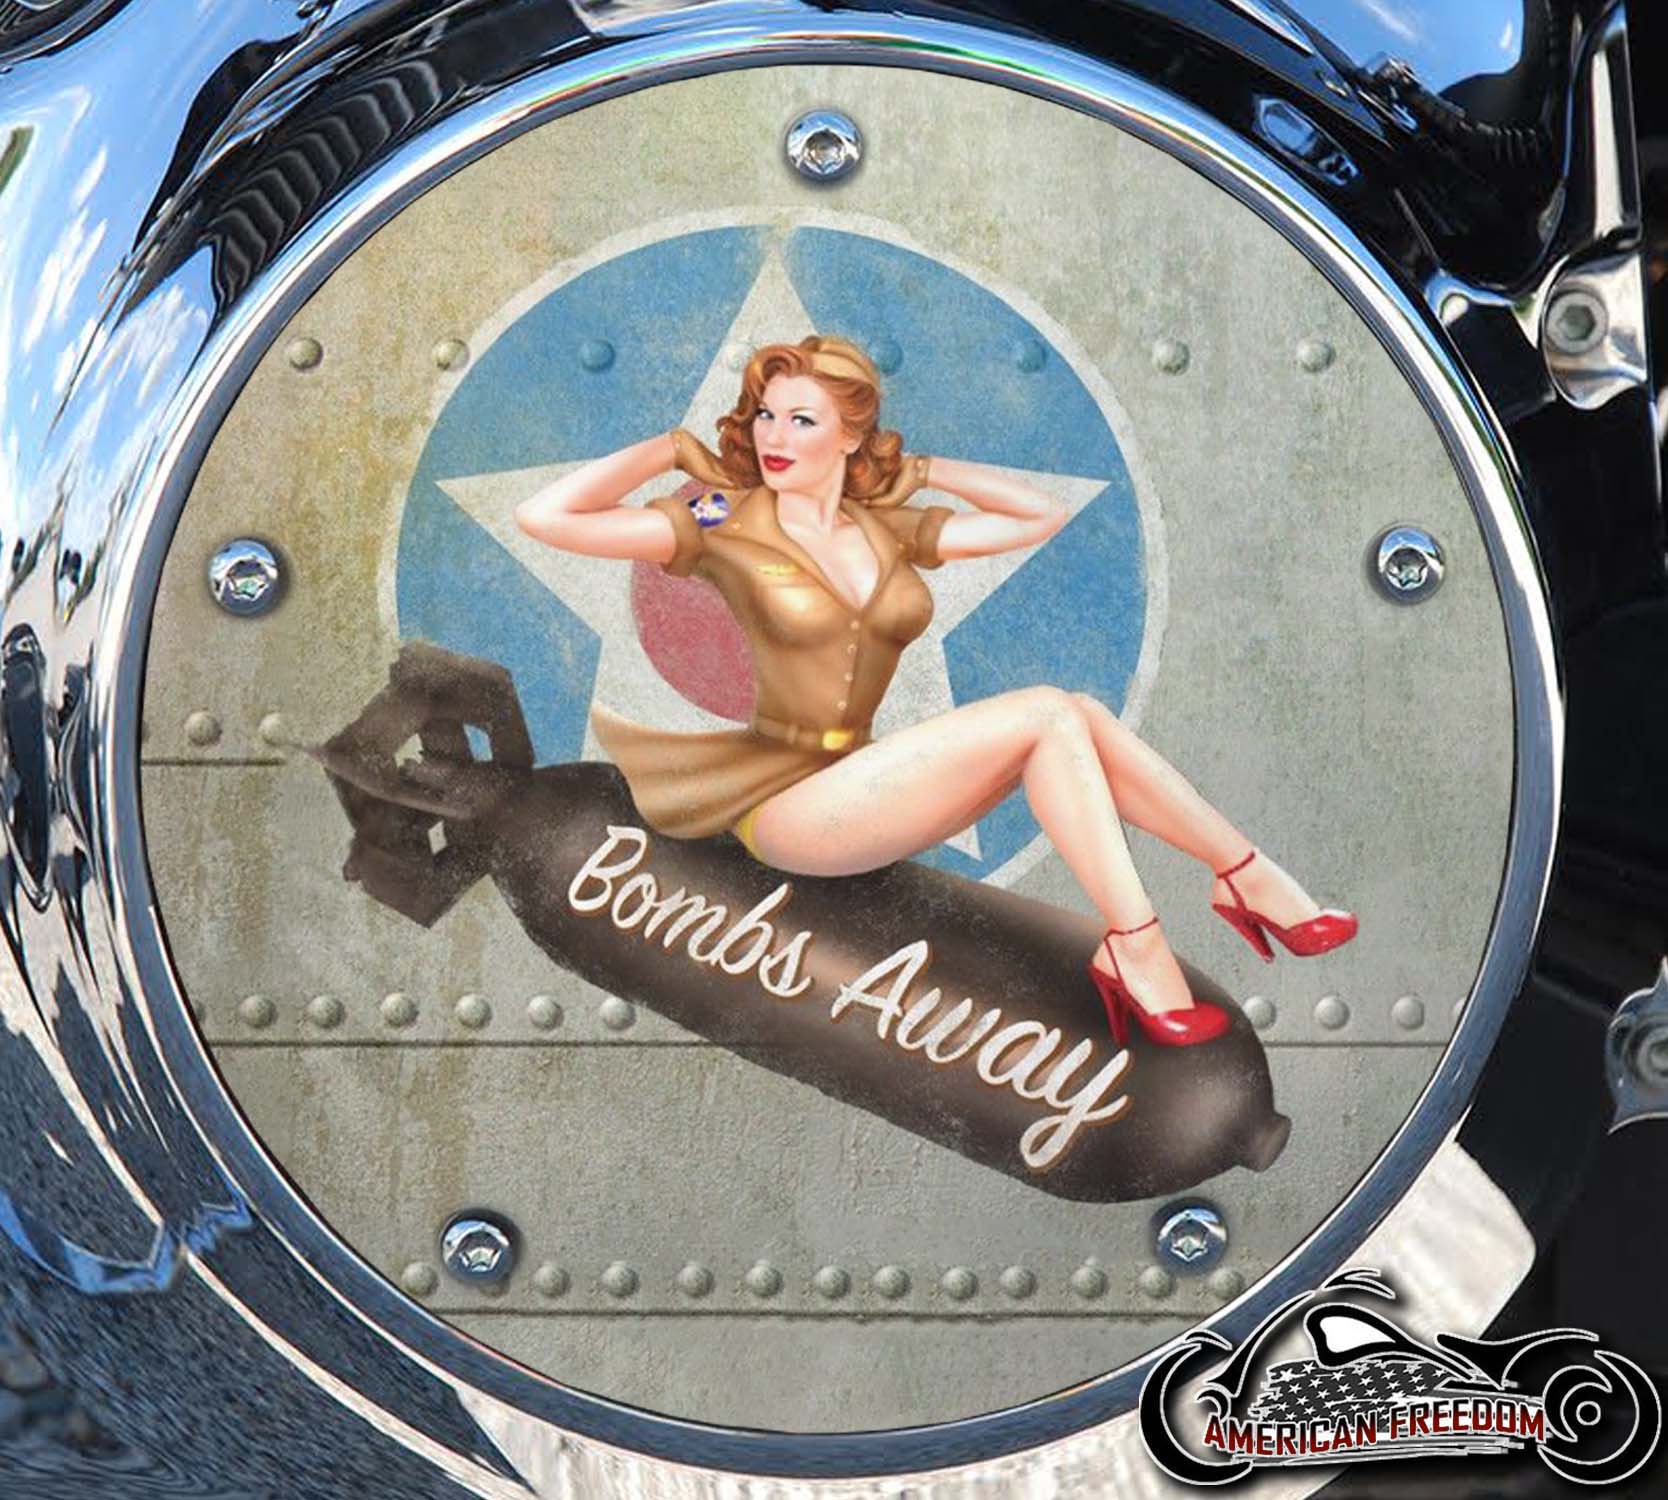 Custom Derby Cover - Bomber Pin Up 2